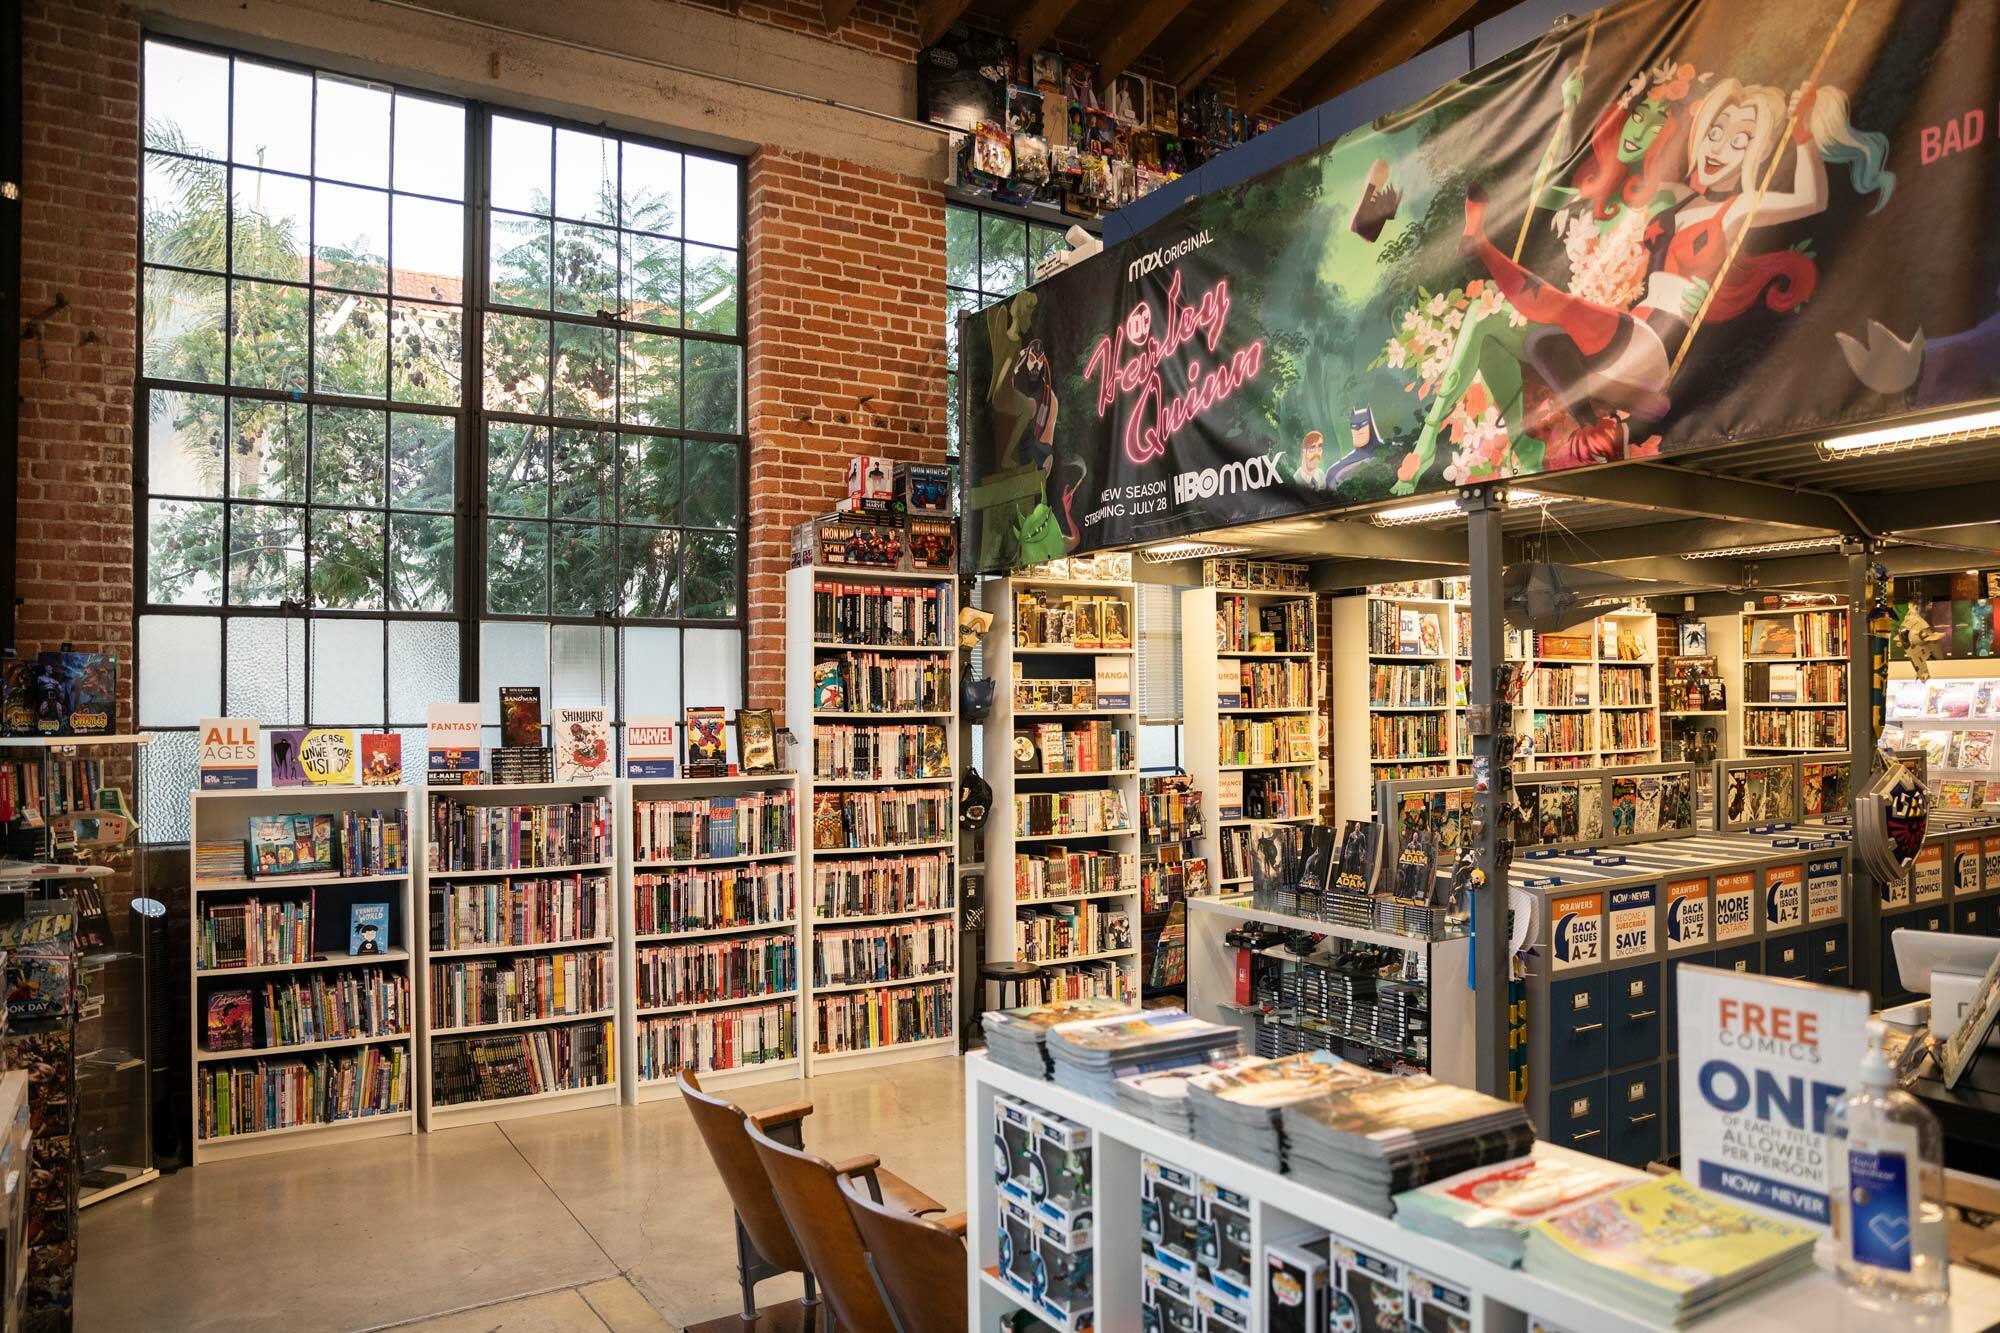 interior of large book store with rows of comic books